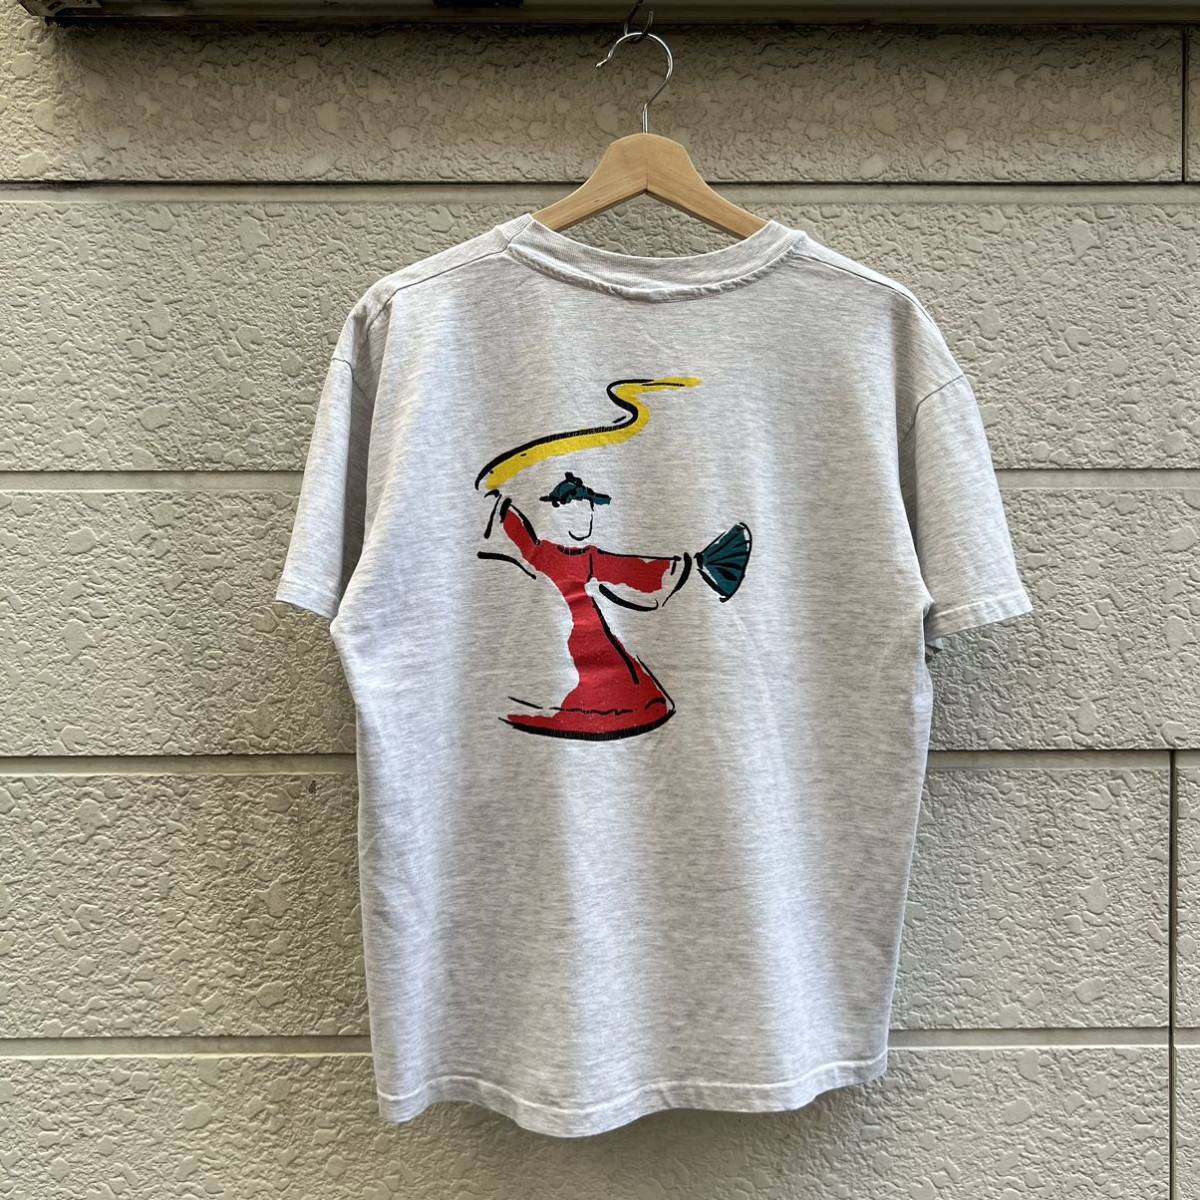 80s 90s USA古着 半袖Tシャツ プリントTシャツ グレー シングルステッチ ASIAN CULTURAL CENTER アメリカ古着 vintage ヴィンテージ_画像3